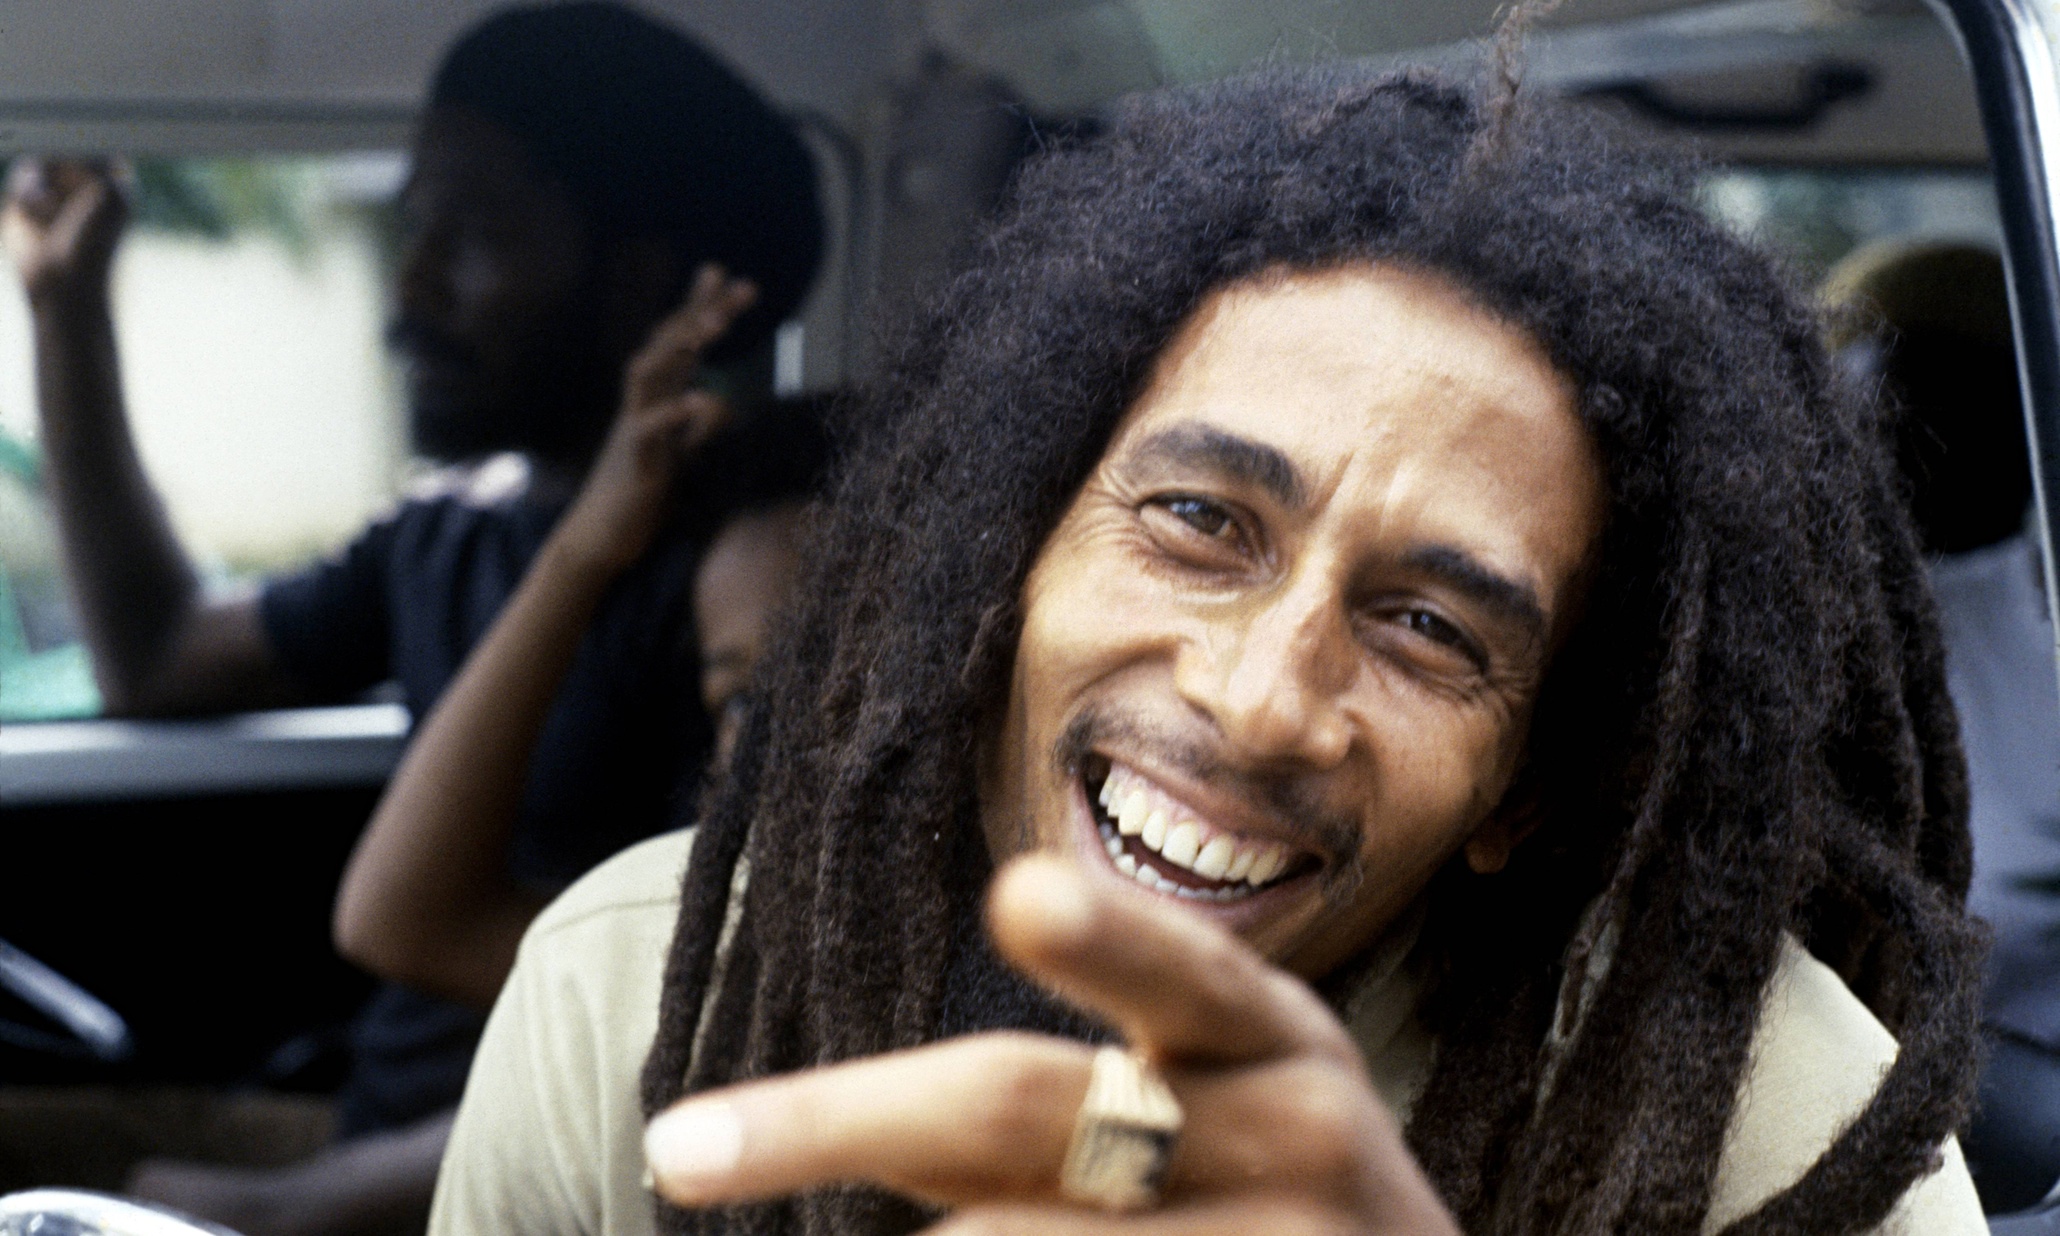 Bob Marley at 70: legend and legacy | Music | The Guardian